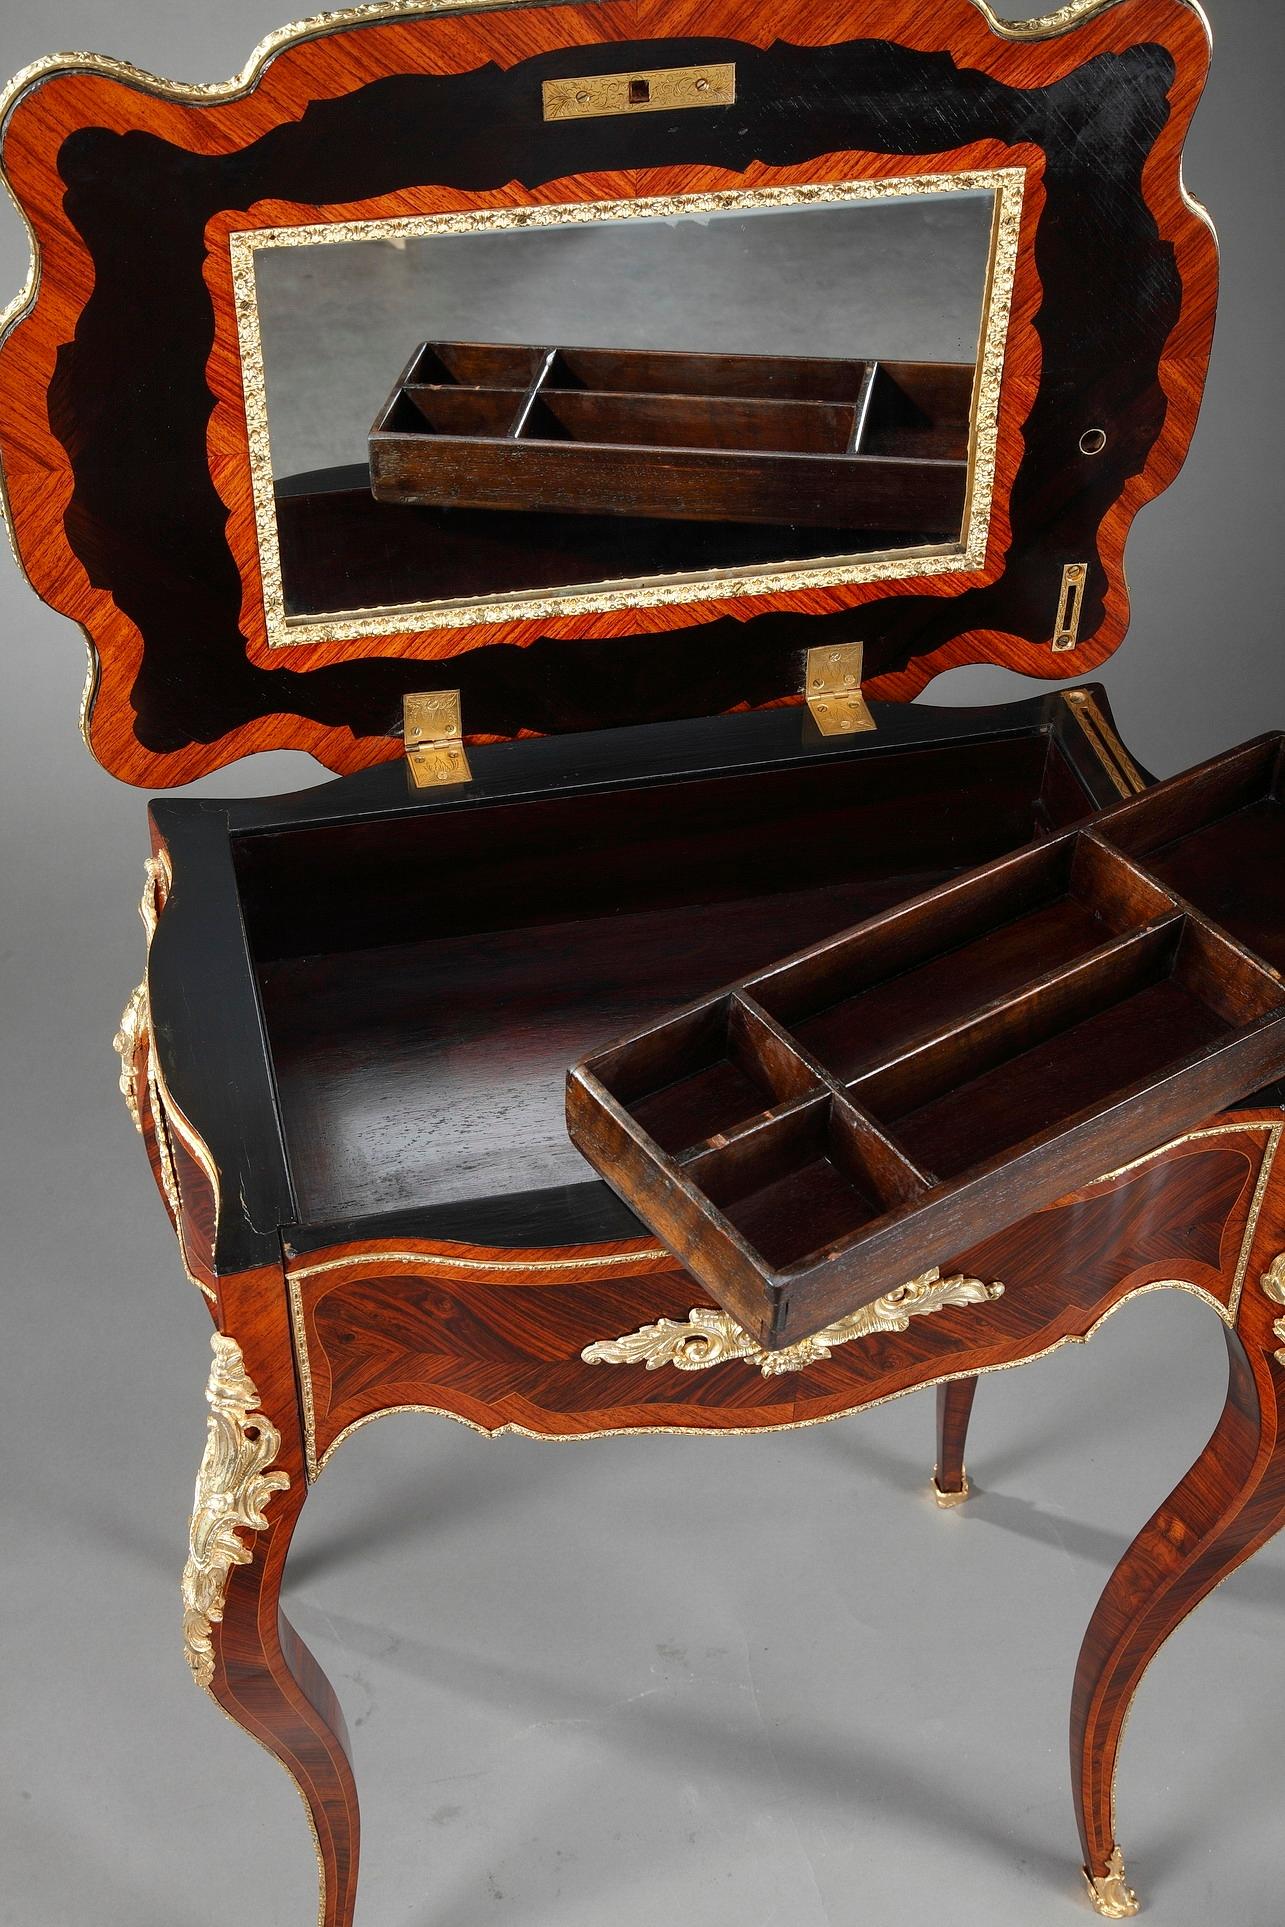 Bronze Dressing Table in Exotic Wood Veneers and Marquetry in Louis XV Style